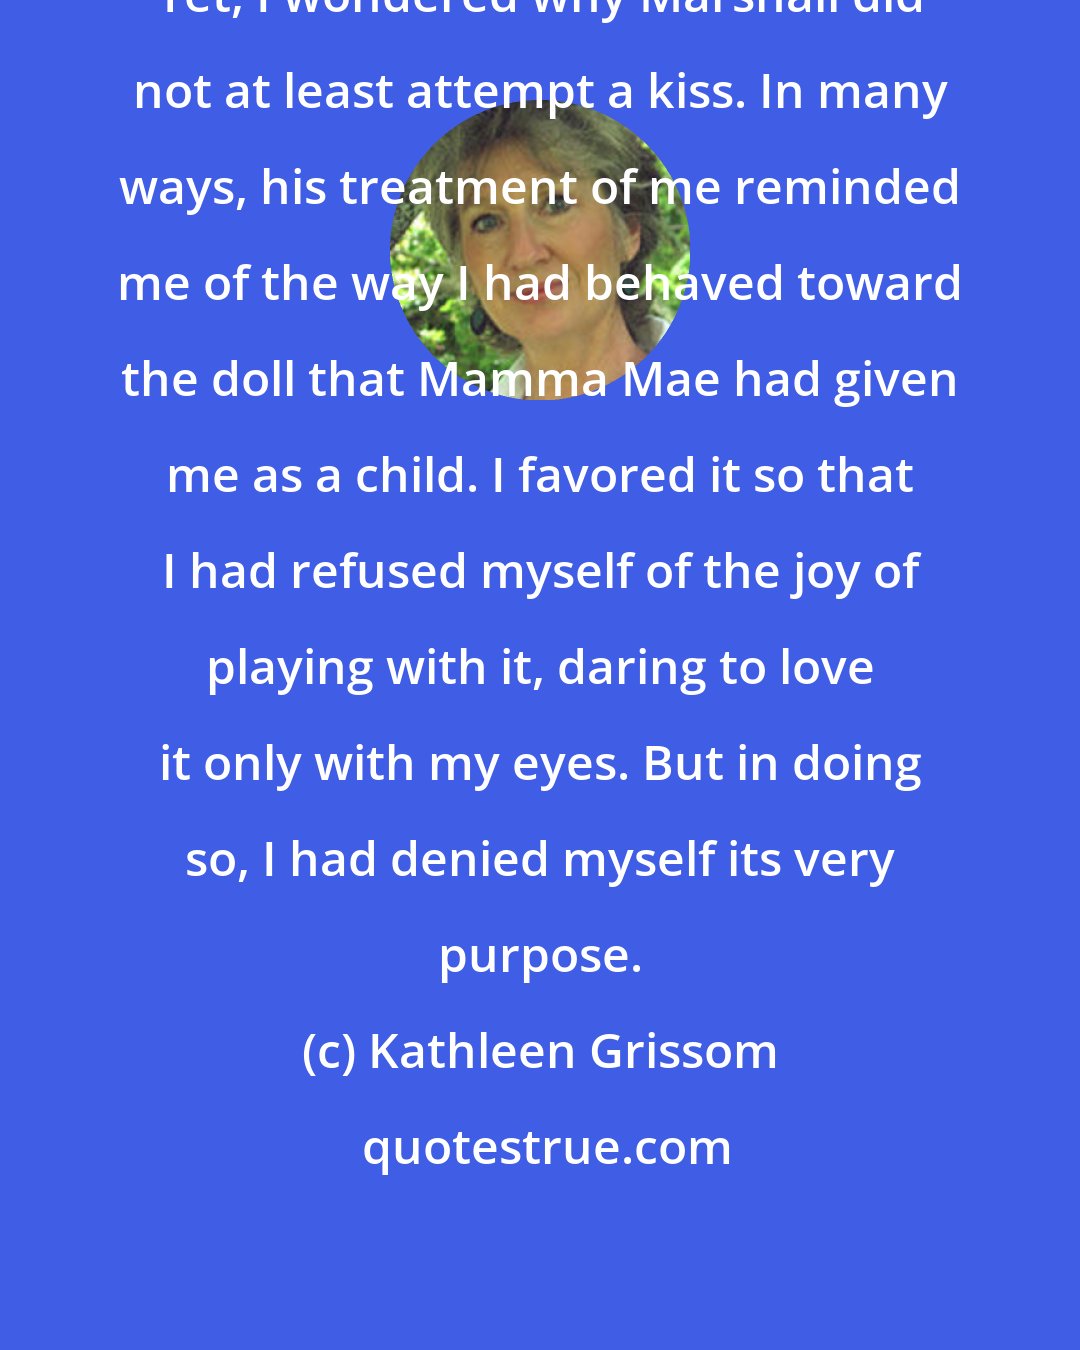 Kathleen Grissom: Yet, I wondered why Marshall did not at least attempt a kiss. In many ways, his treatment of me reminded me of the way I had behaved toward the doll that Mamma Mae had given me as a child. I favored it so that I had refused myself of the joy of playing with it, daring to love it only with my eyes. But in doing so, I had denied myself its very purpose.